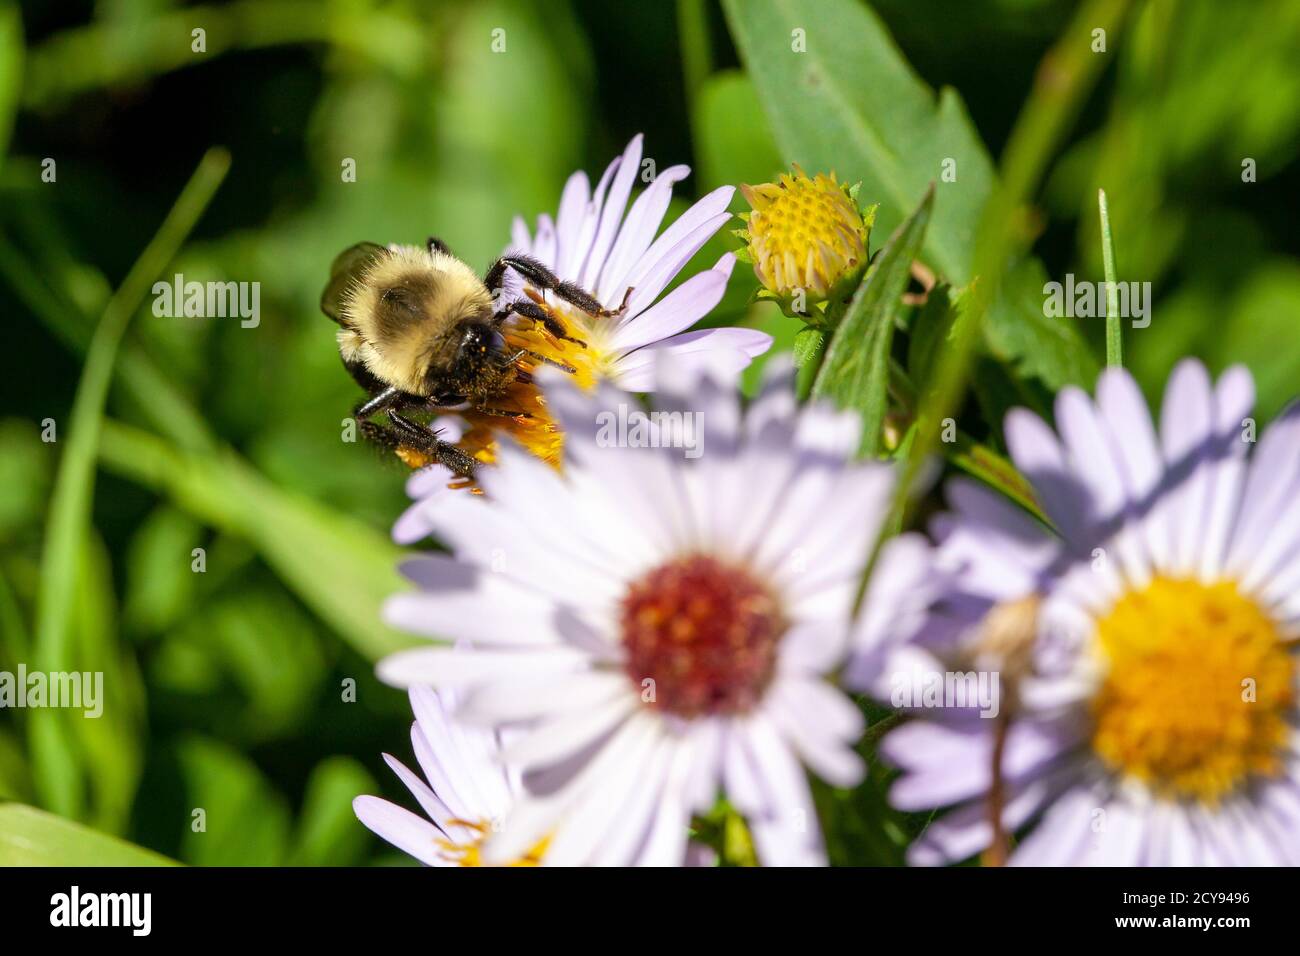 Bee collecting pollen on a flower of the daisy family Stock Photo